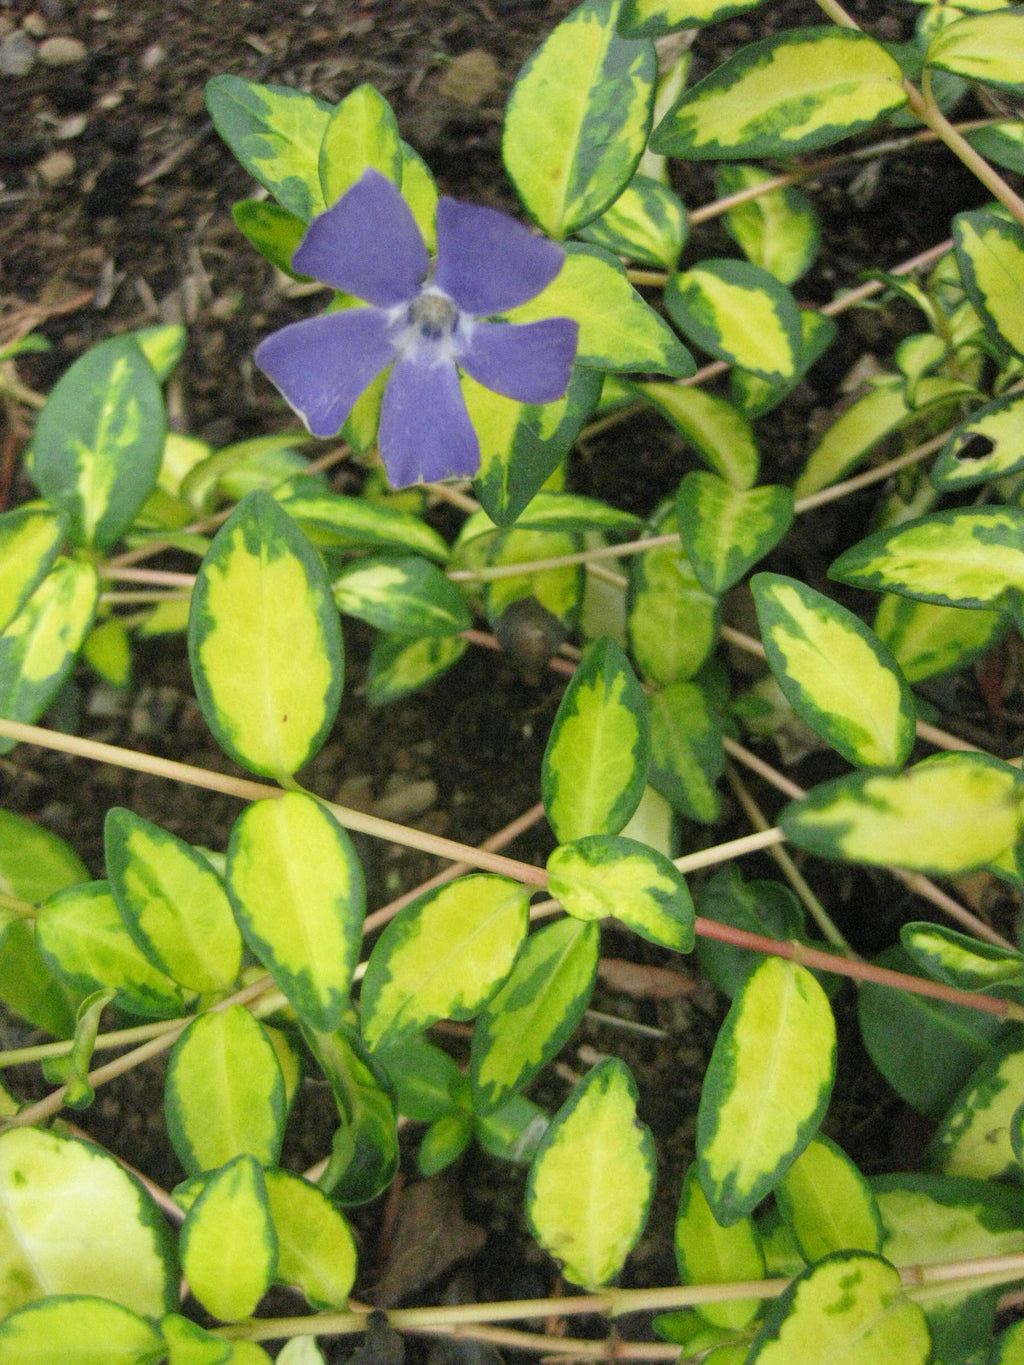 10 x 'Illumination' variegated perennial blue Periwinkle bare root offsets